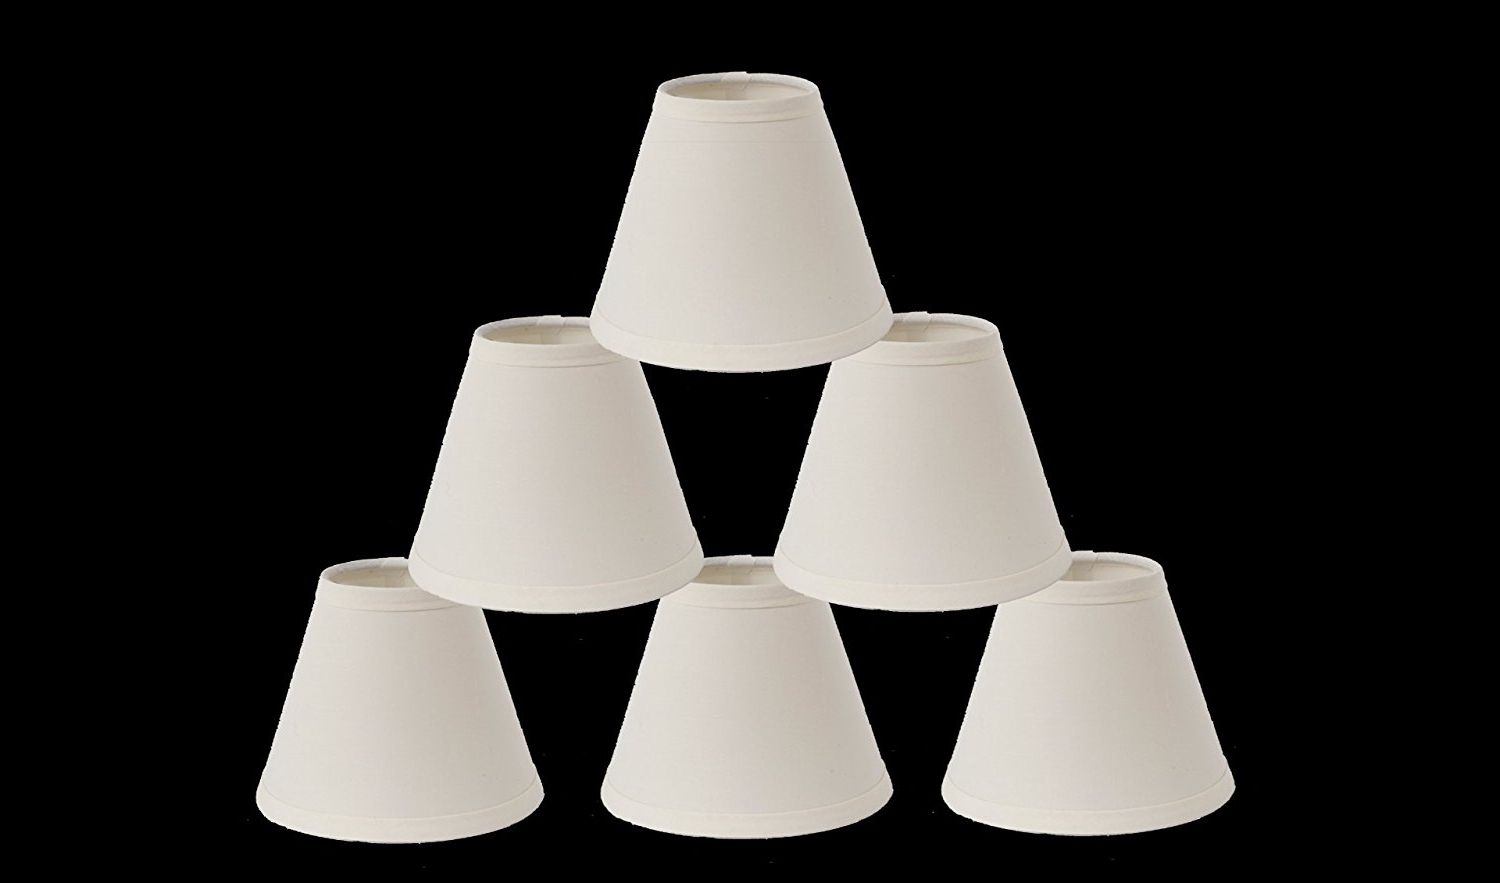 Chandelier Lamp Shades Clip On Within Most Recently Released Urbanest 1100327c Mini Chandelier Lamp Shades 6 Inch, Cotton (View 7 of 15)